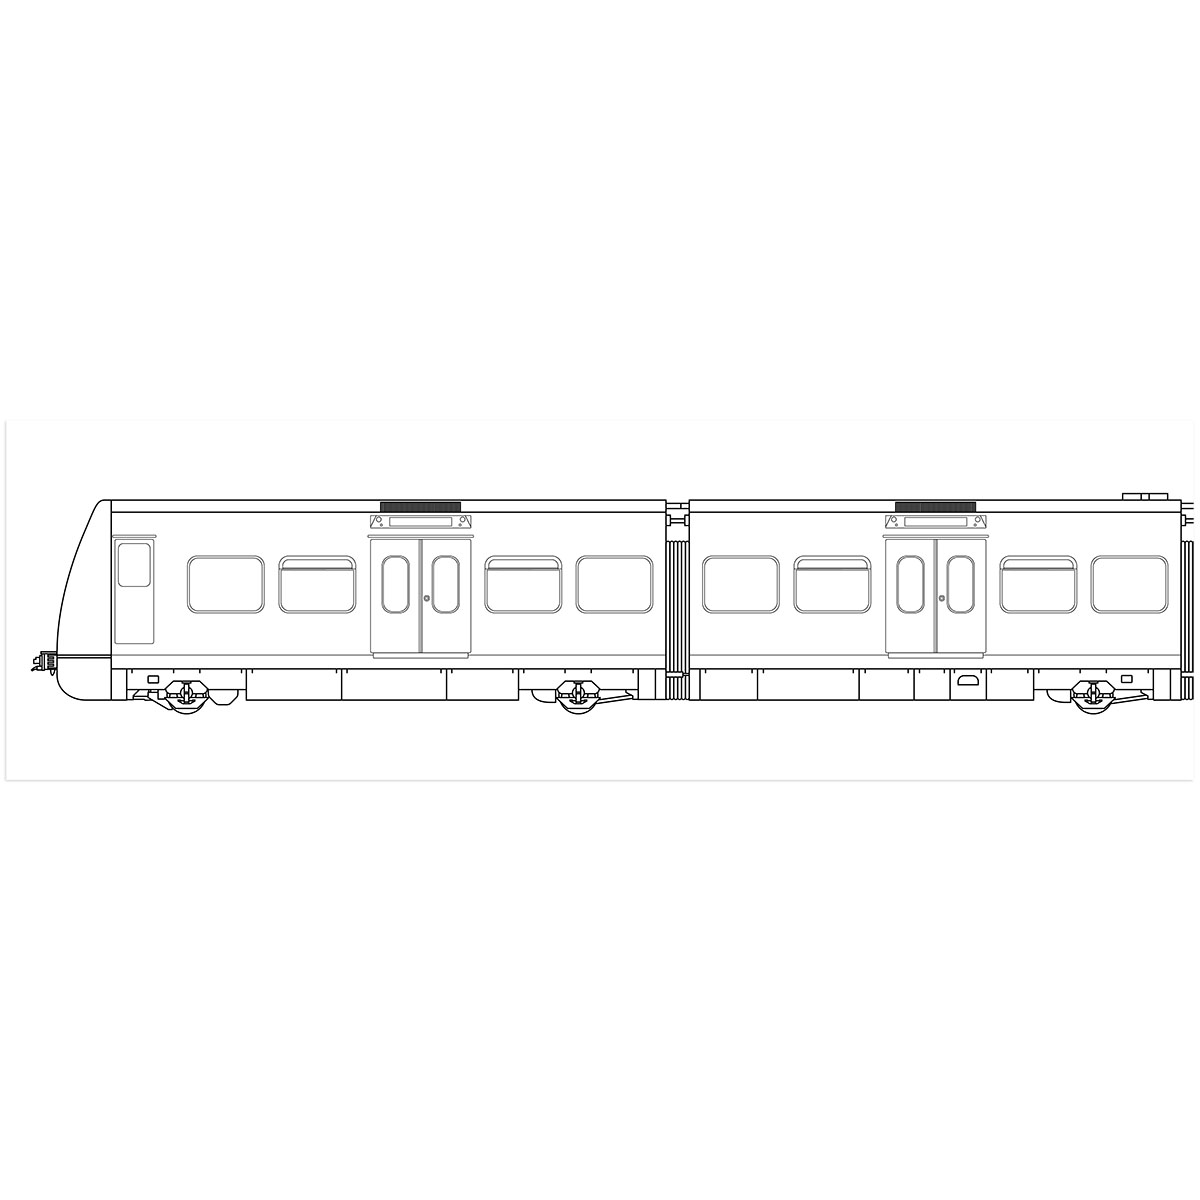 Train Drawing Images | Free Photos, PNG Stickers, Wallpapers & Backgrounds  - rawpixel